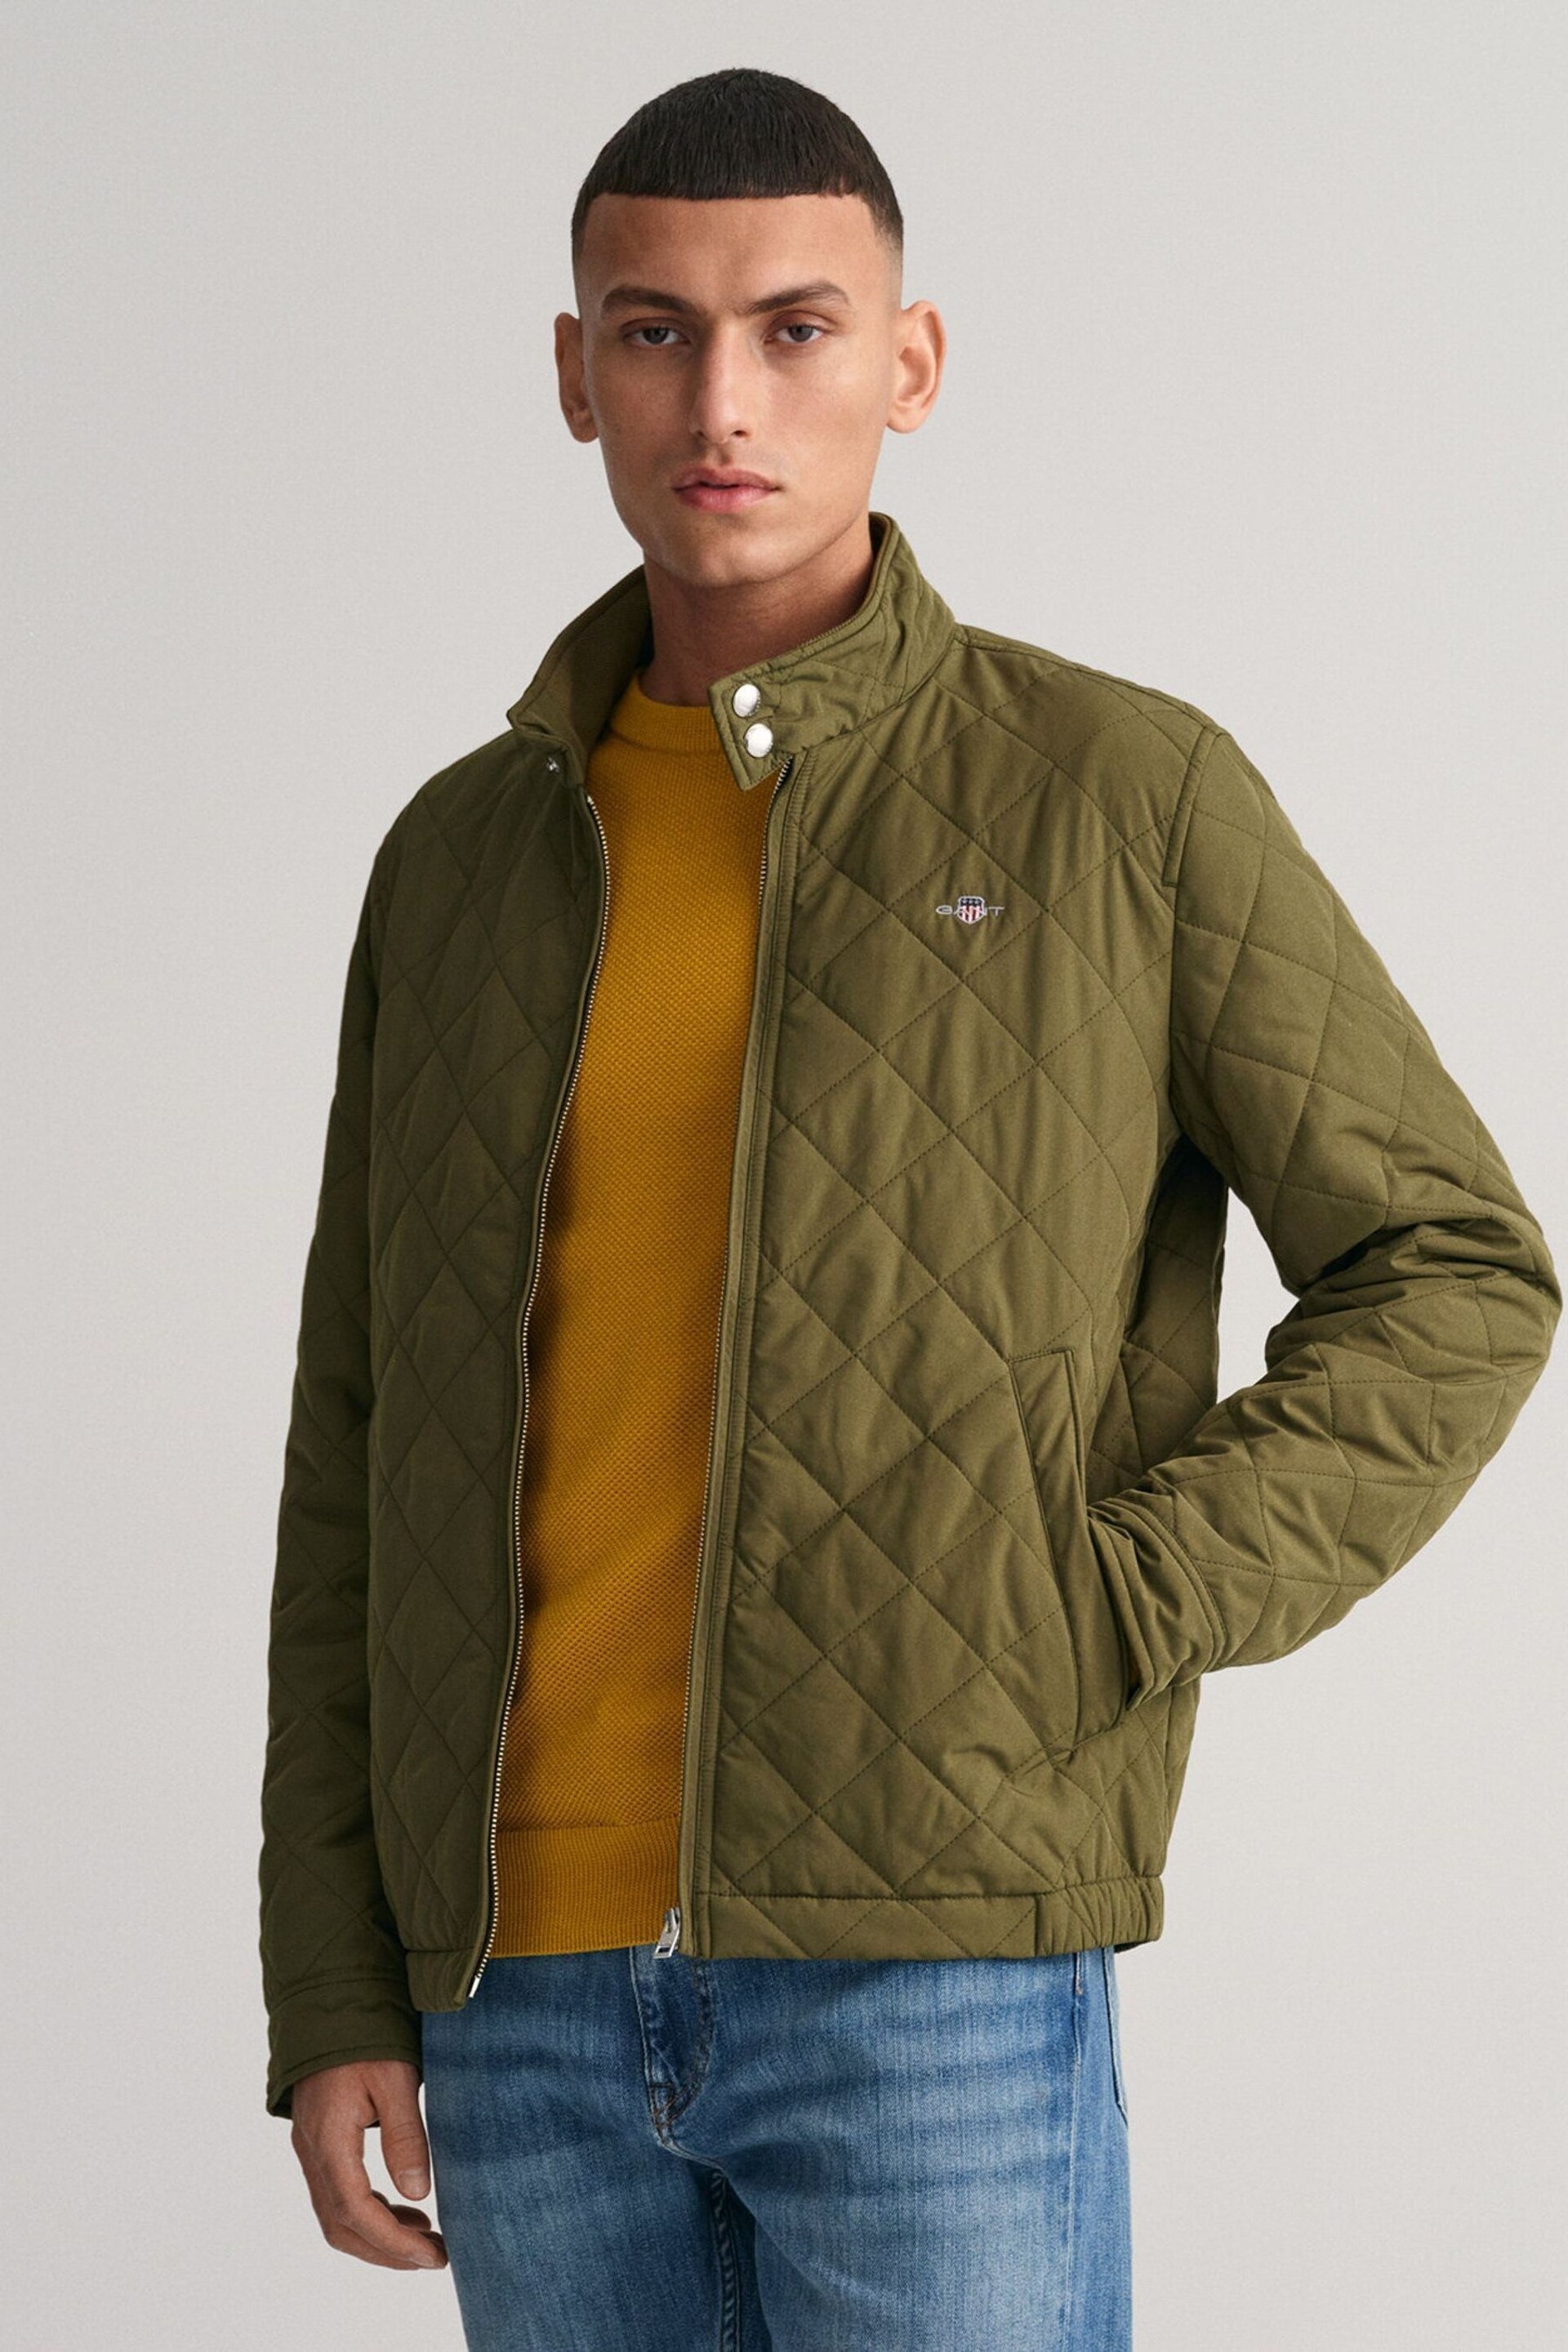 GANT Green Quilted Windcheater Jacket - Image 1 of 6